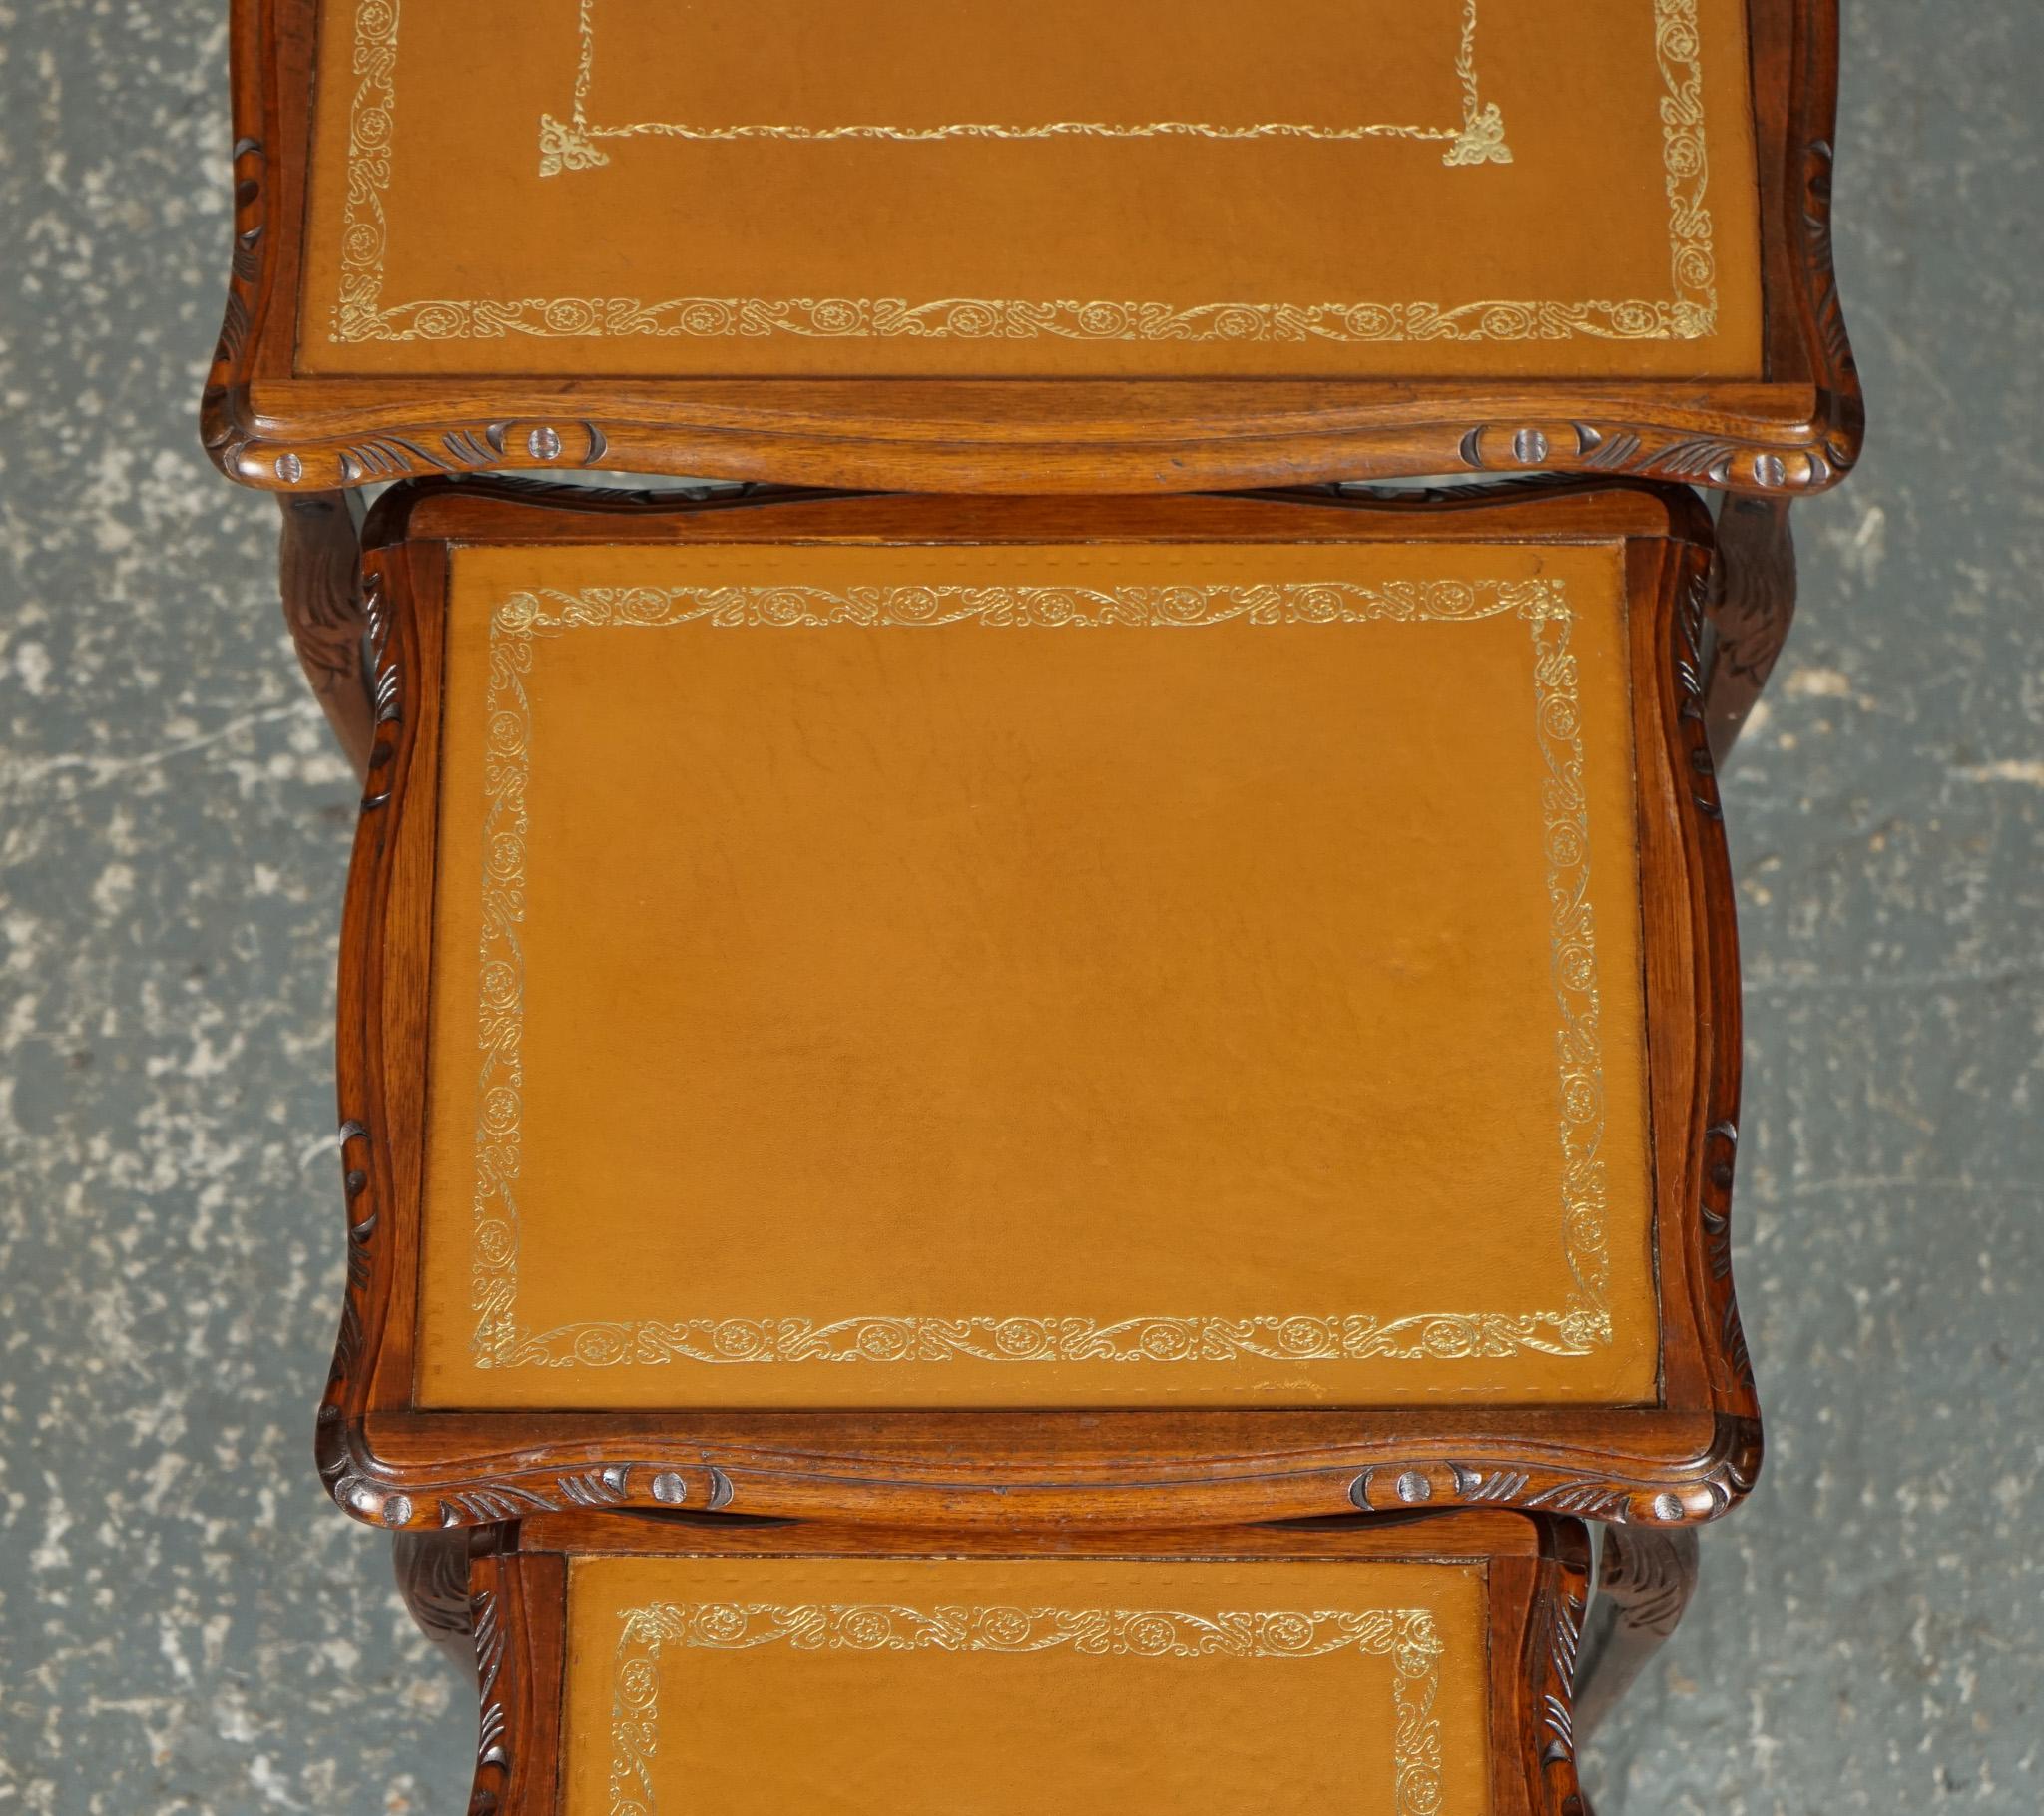 VINTAGE NEST OF TABLES QUEEN ANNE STYLE LEGS WiTH BROWN EMBOSSED LEATHER TOP J1 For Sale 3